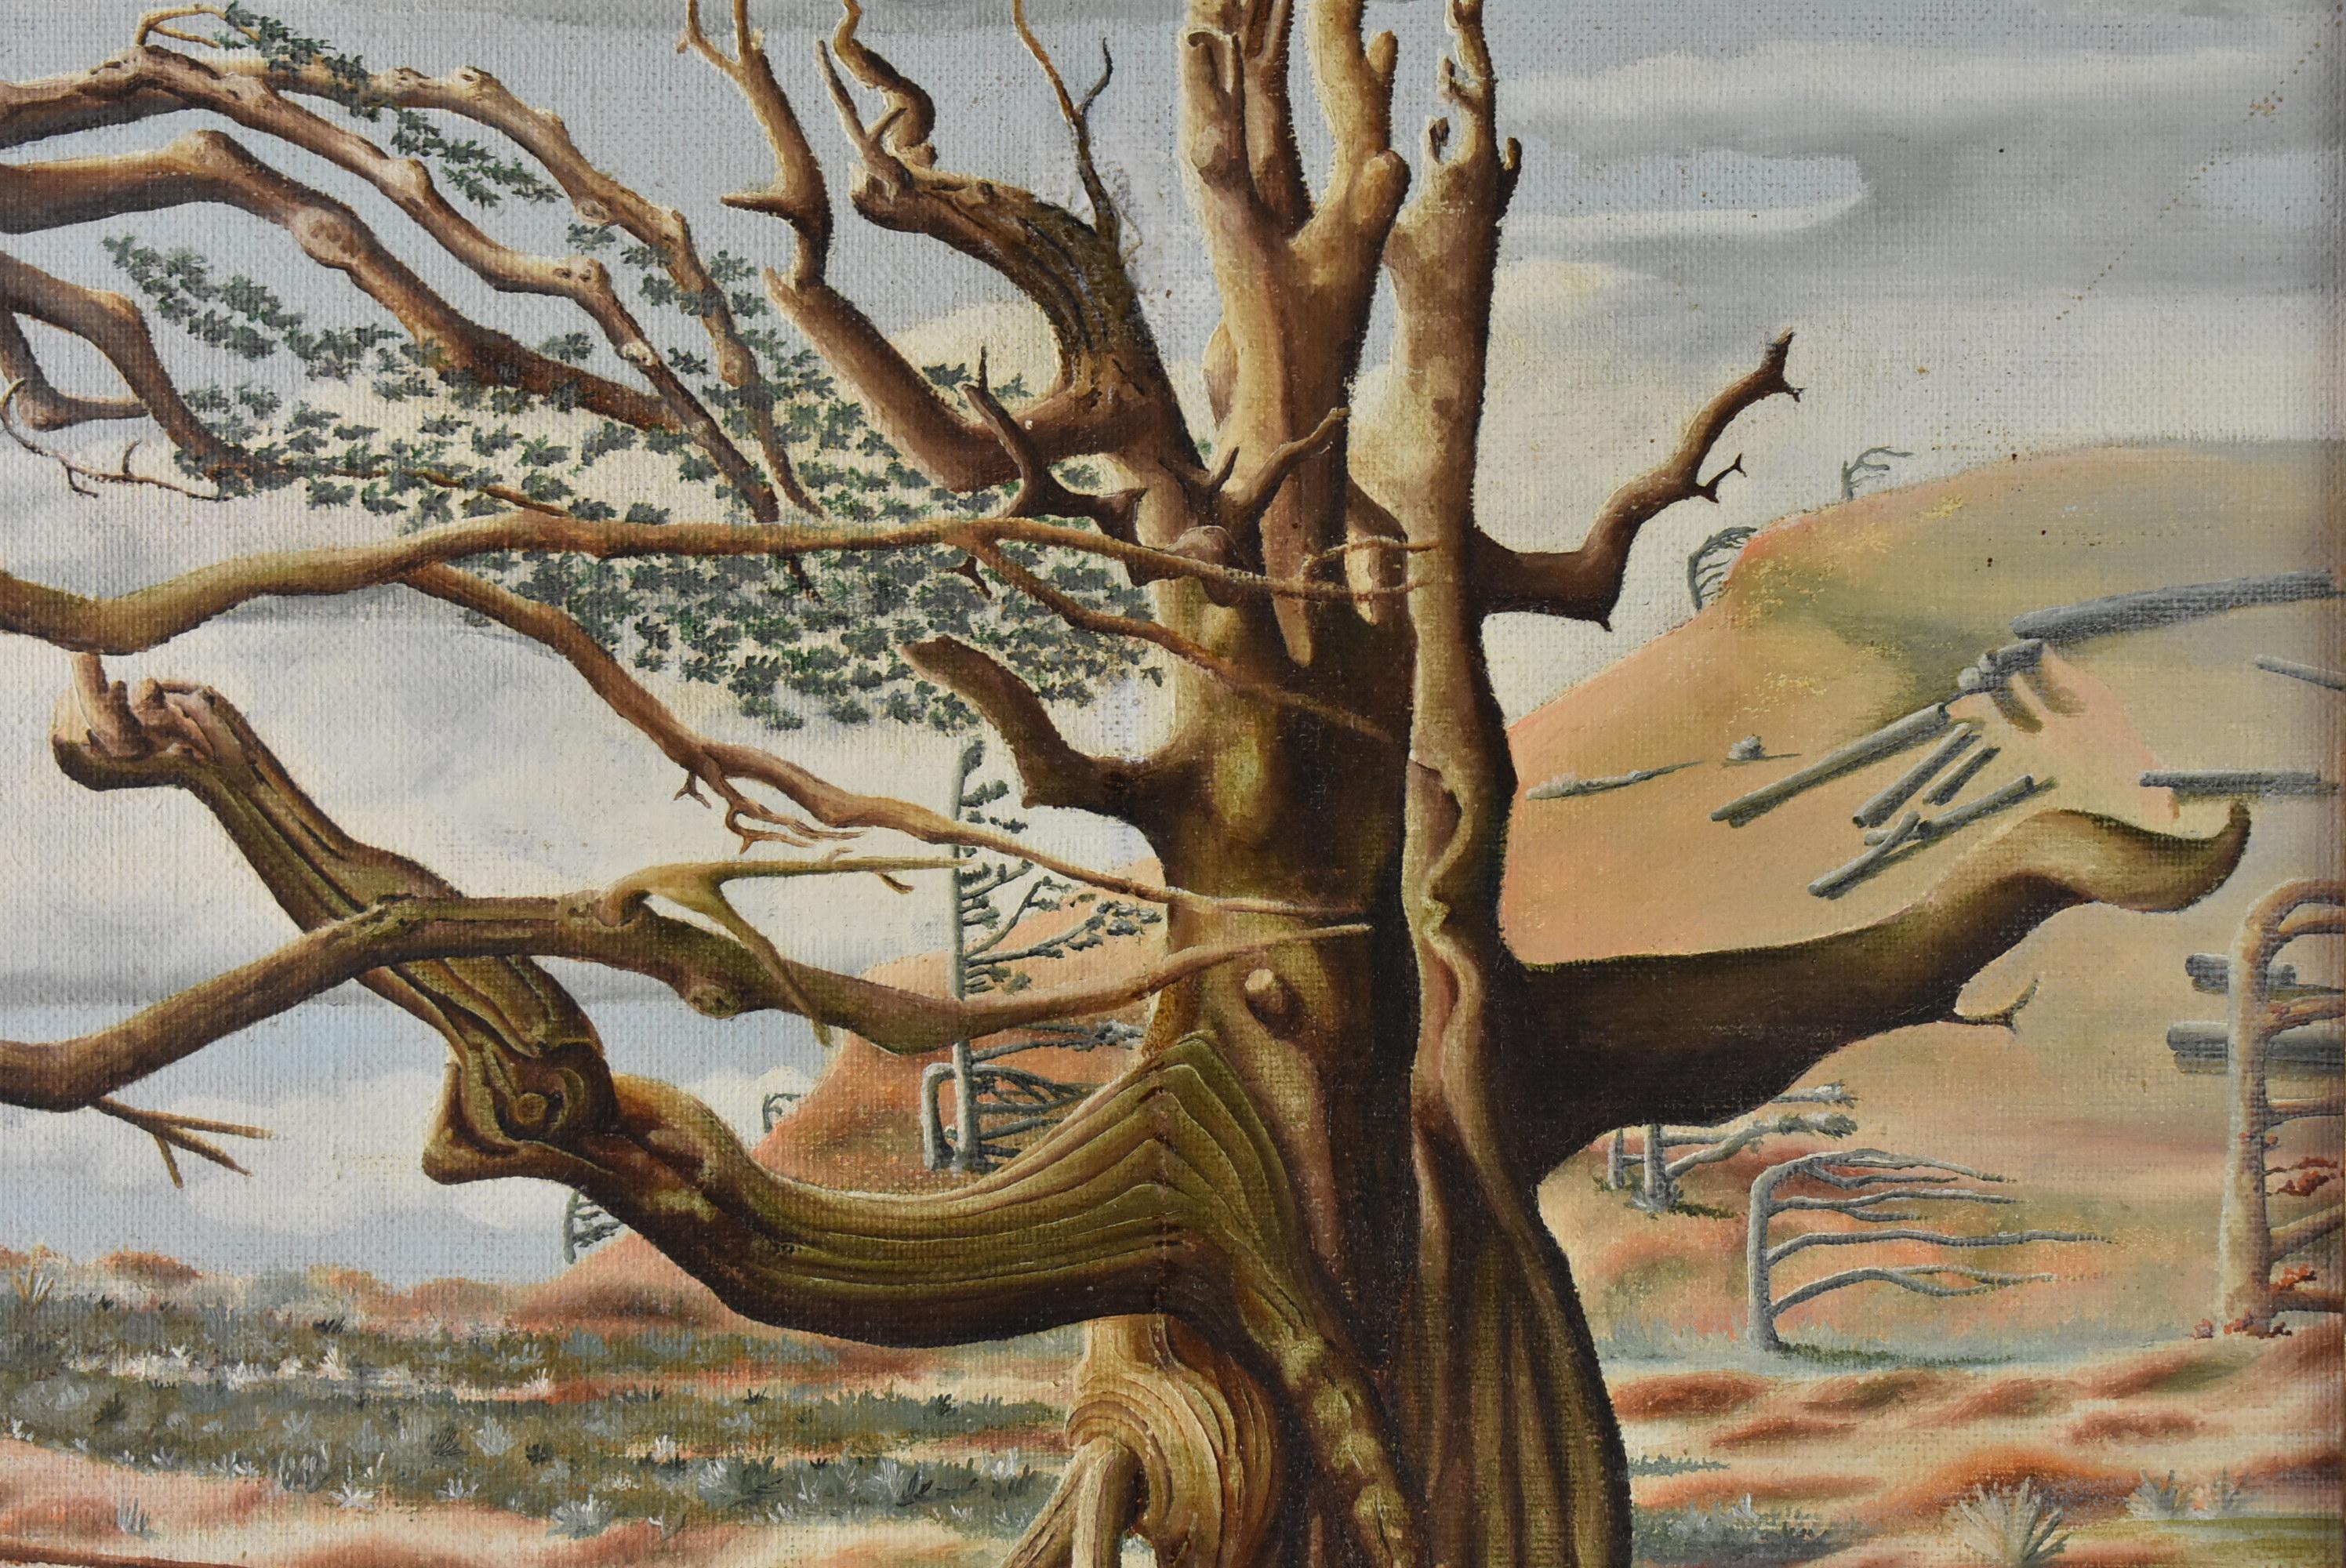 Unique surrealistic style painting of bent trees on a rocky cliff overlooking water, or possibly floating in the sky. Signed Raymond Warren, 1953 in a Heydenryk frame. Overall 32 1/2